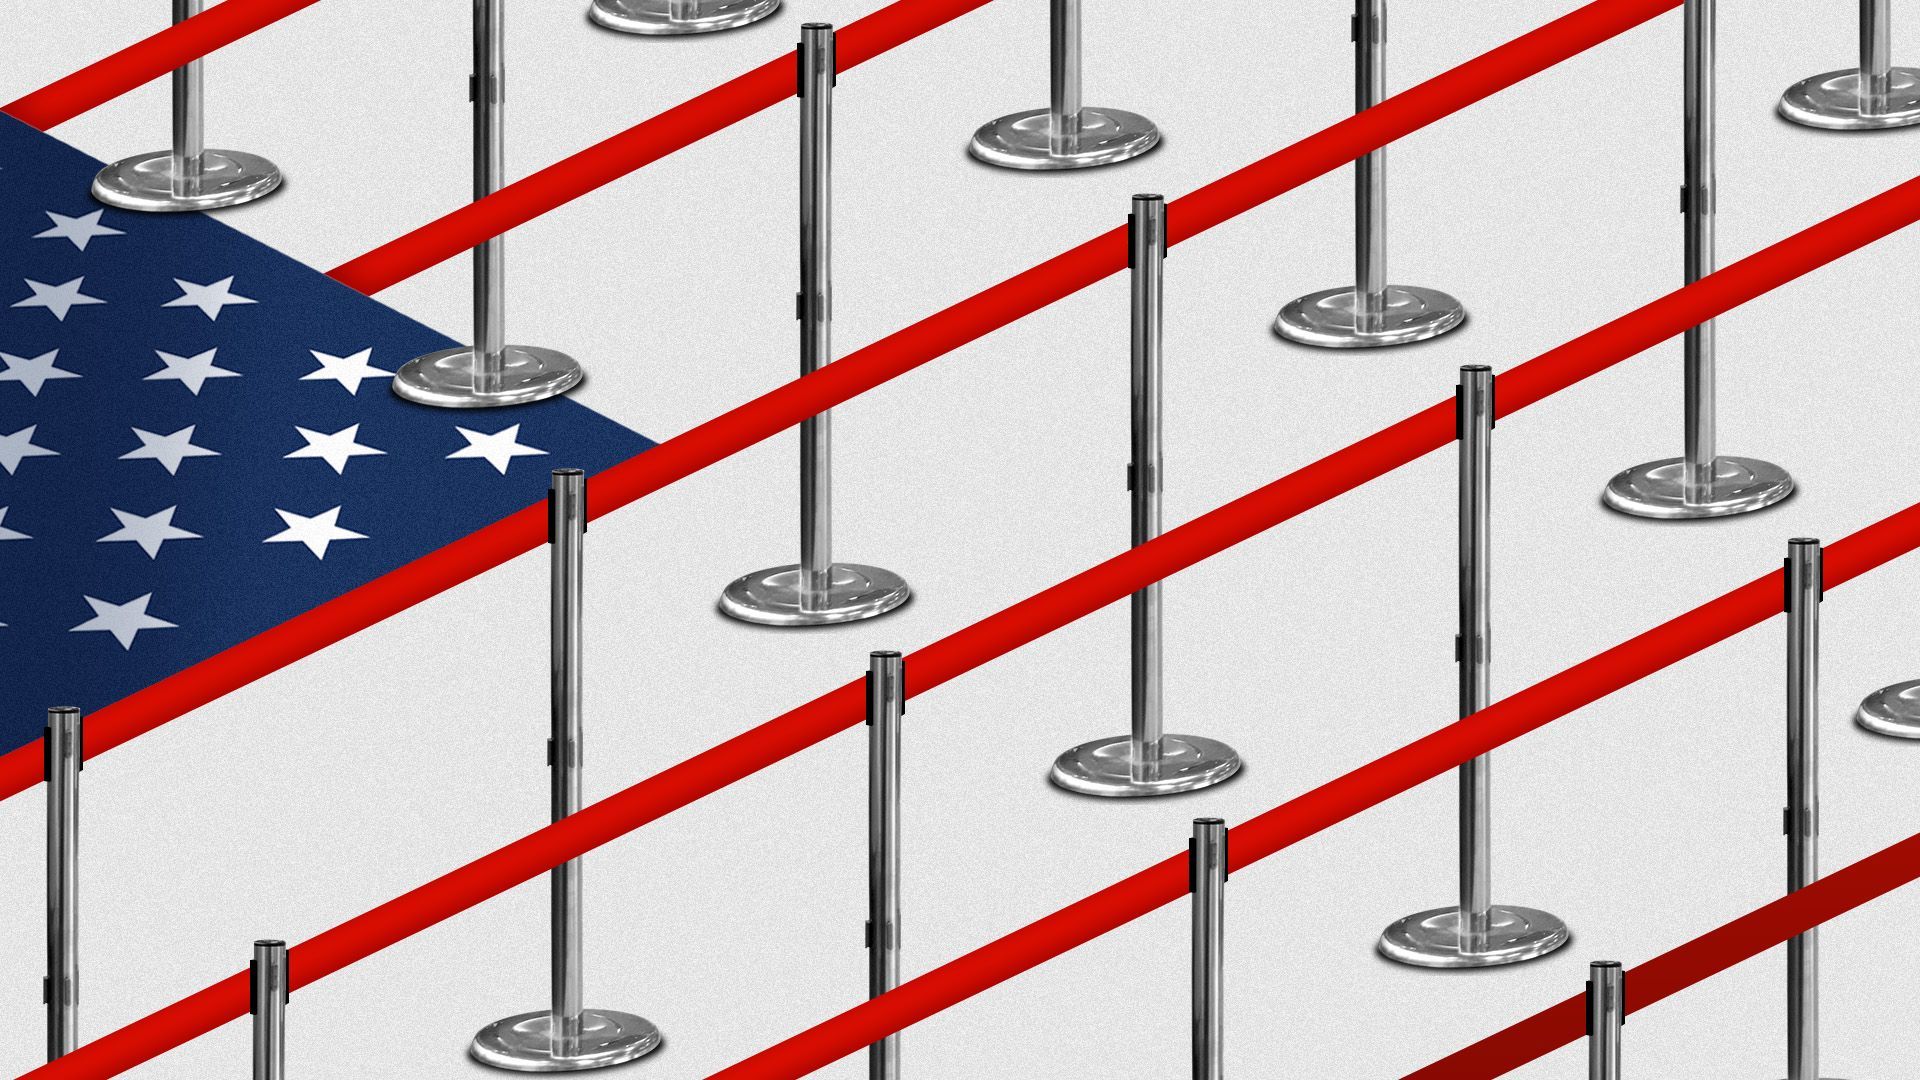 Illustration of a queue of airport stanchions and rope in the shape of the U.S. flag